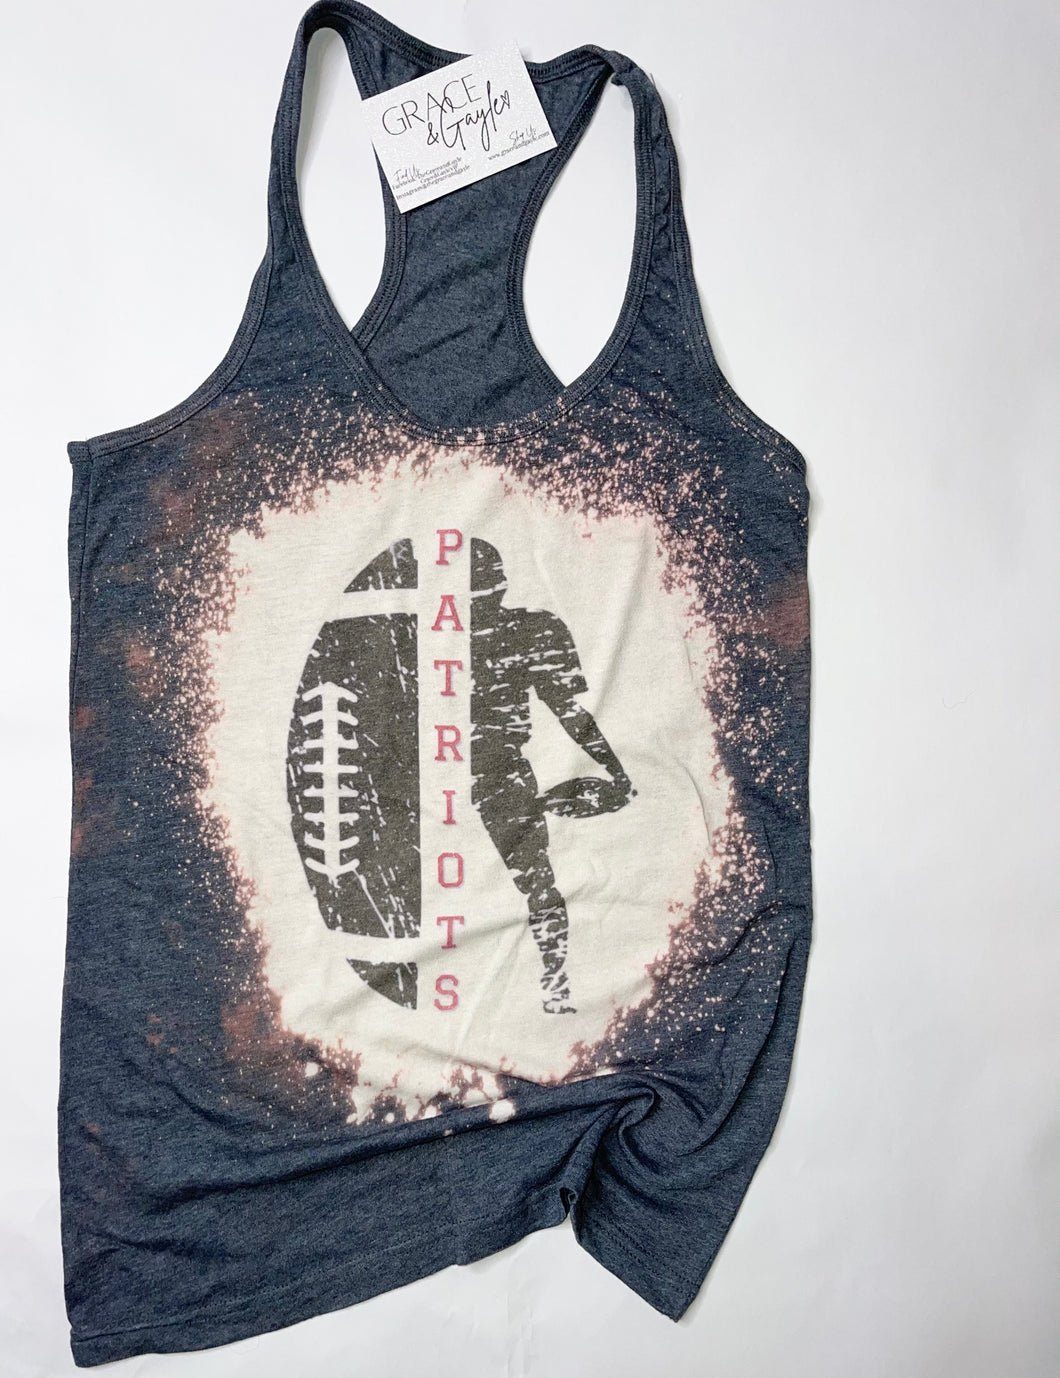 Navy Patriot Player Bleached tank